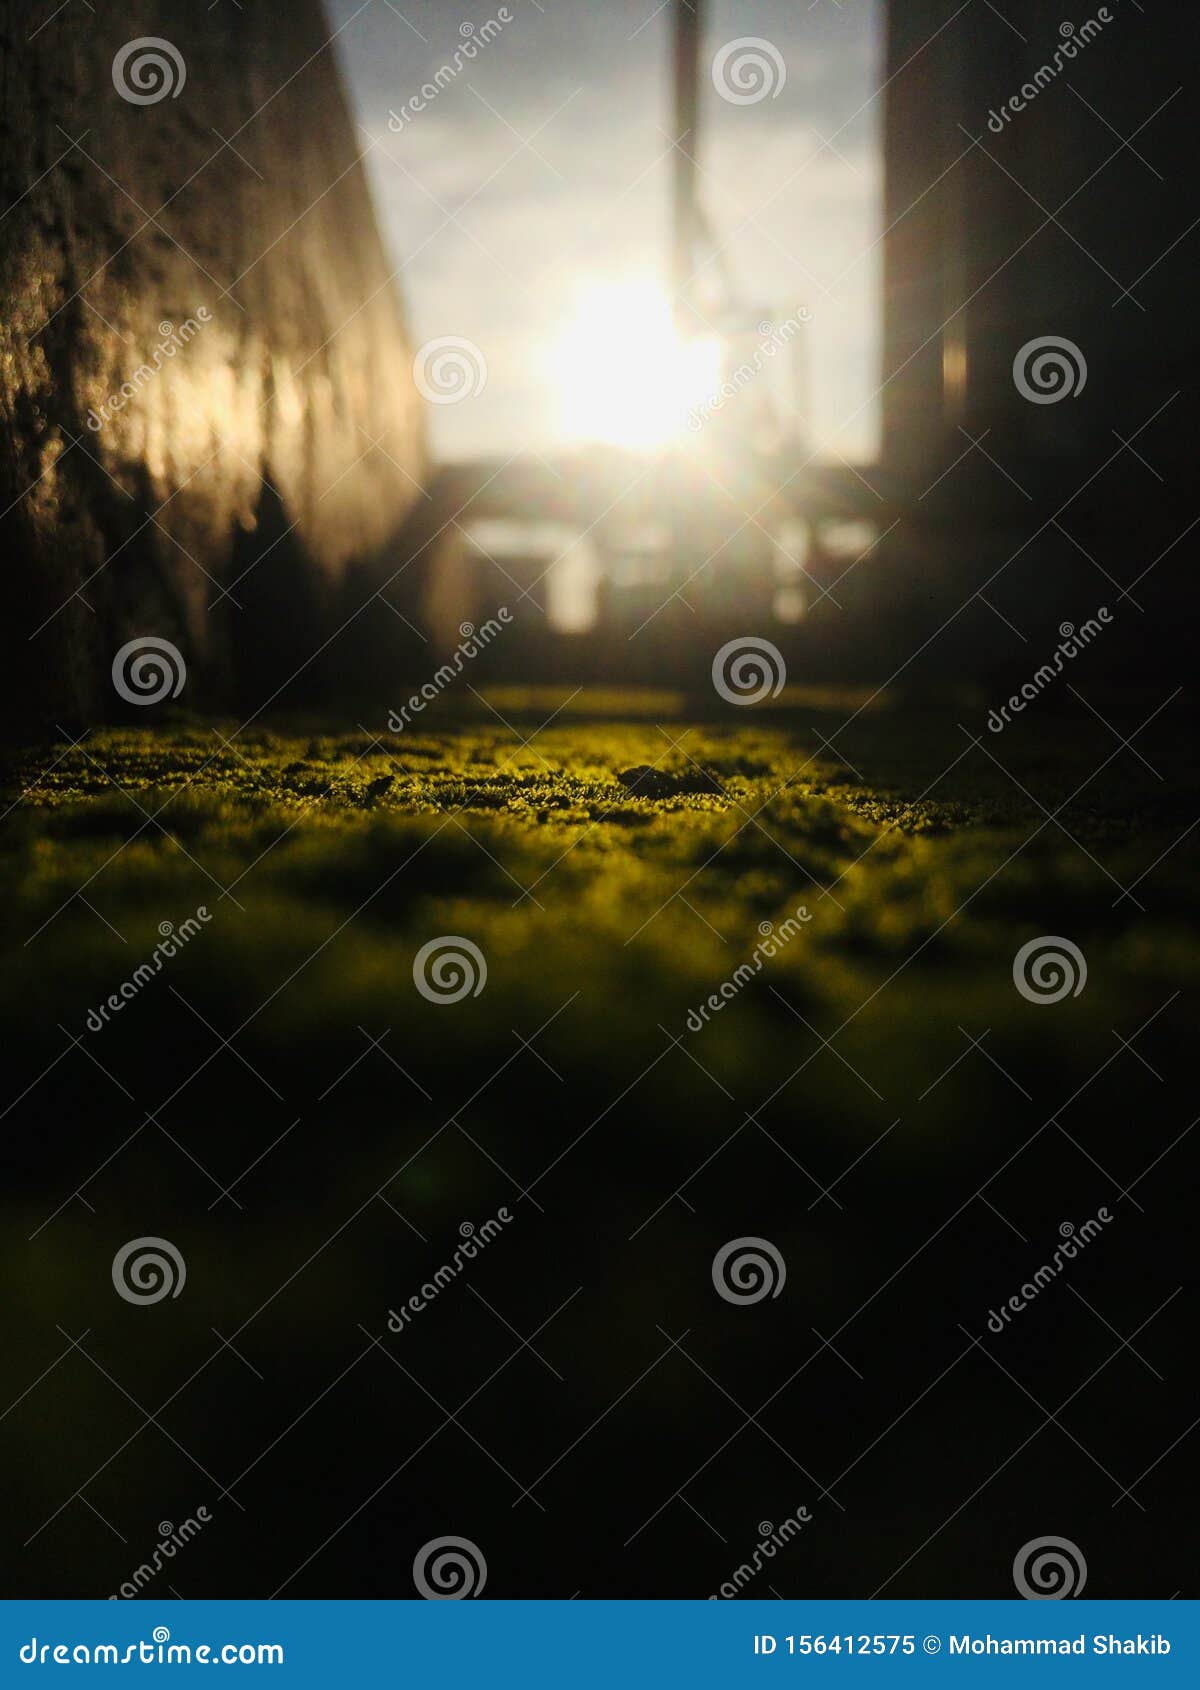 Light comes after darkness stock image. Image of peaceful - 156412575